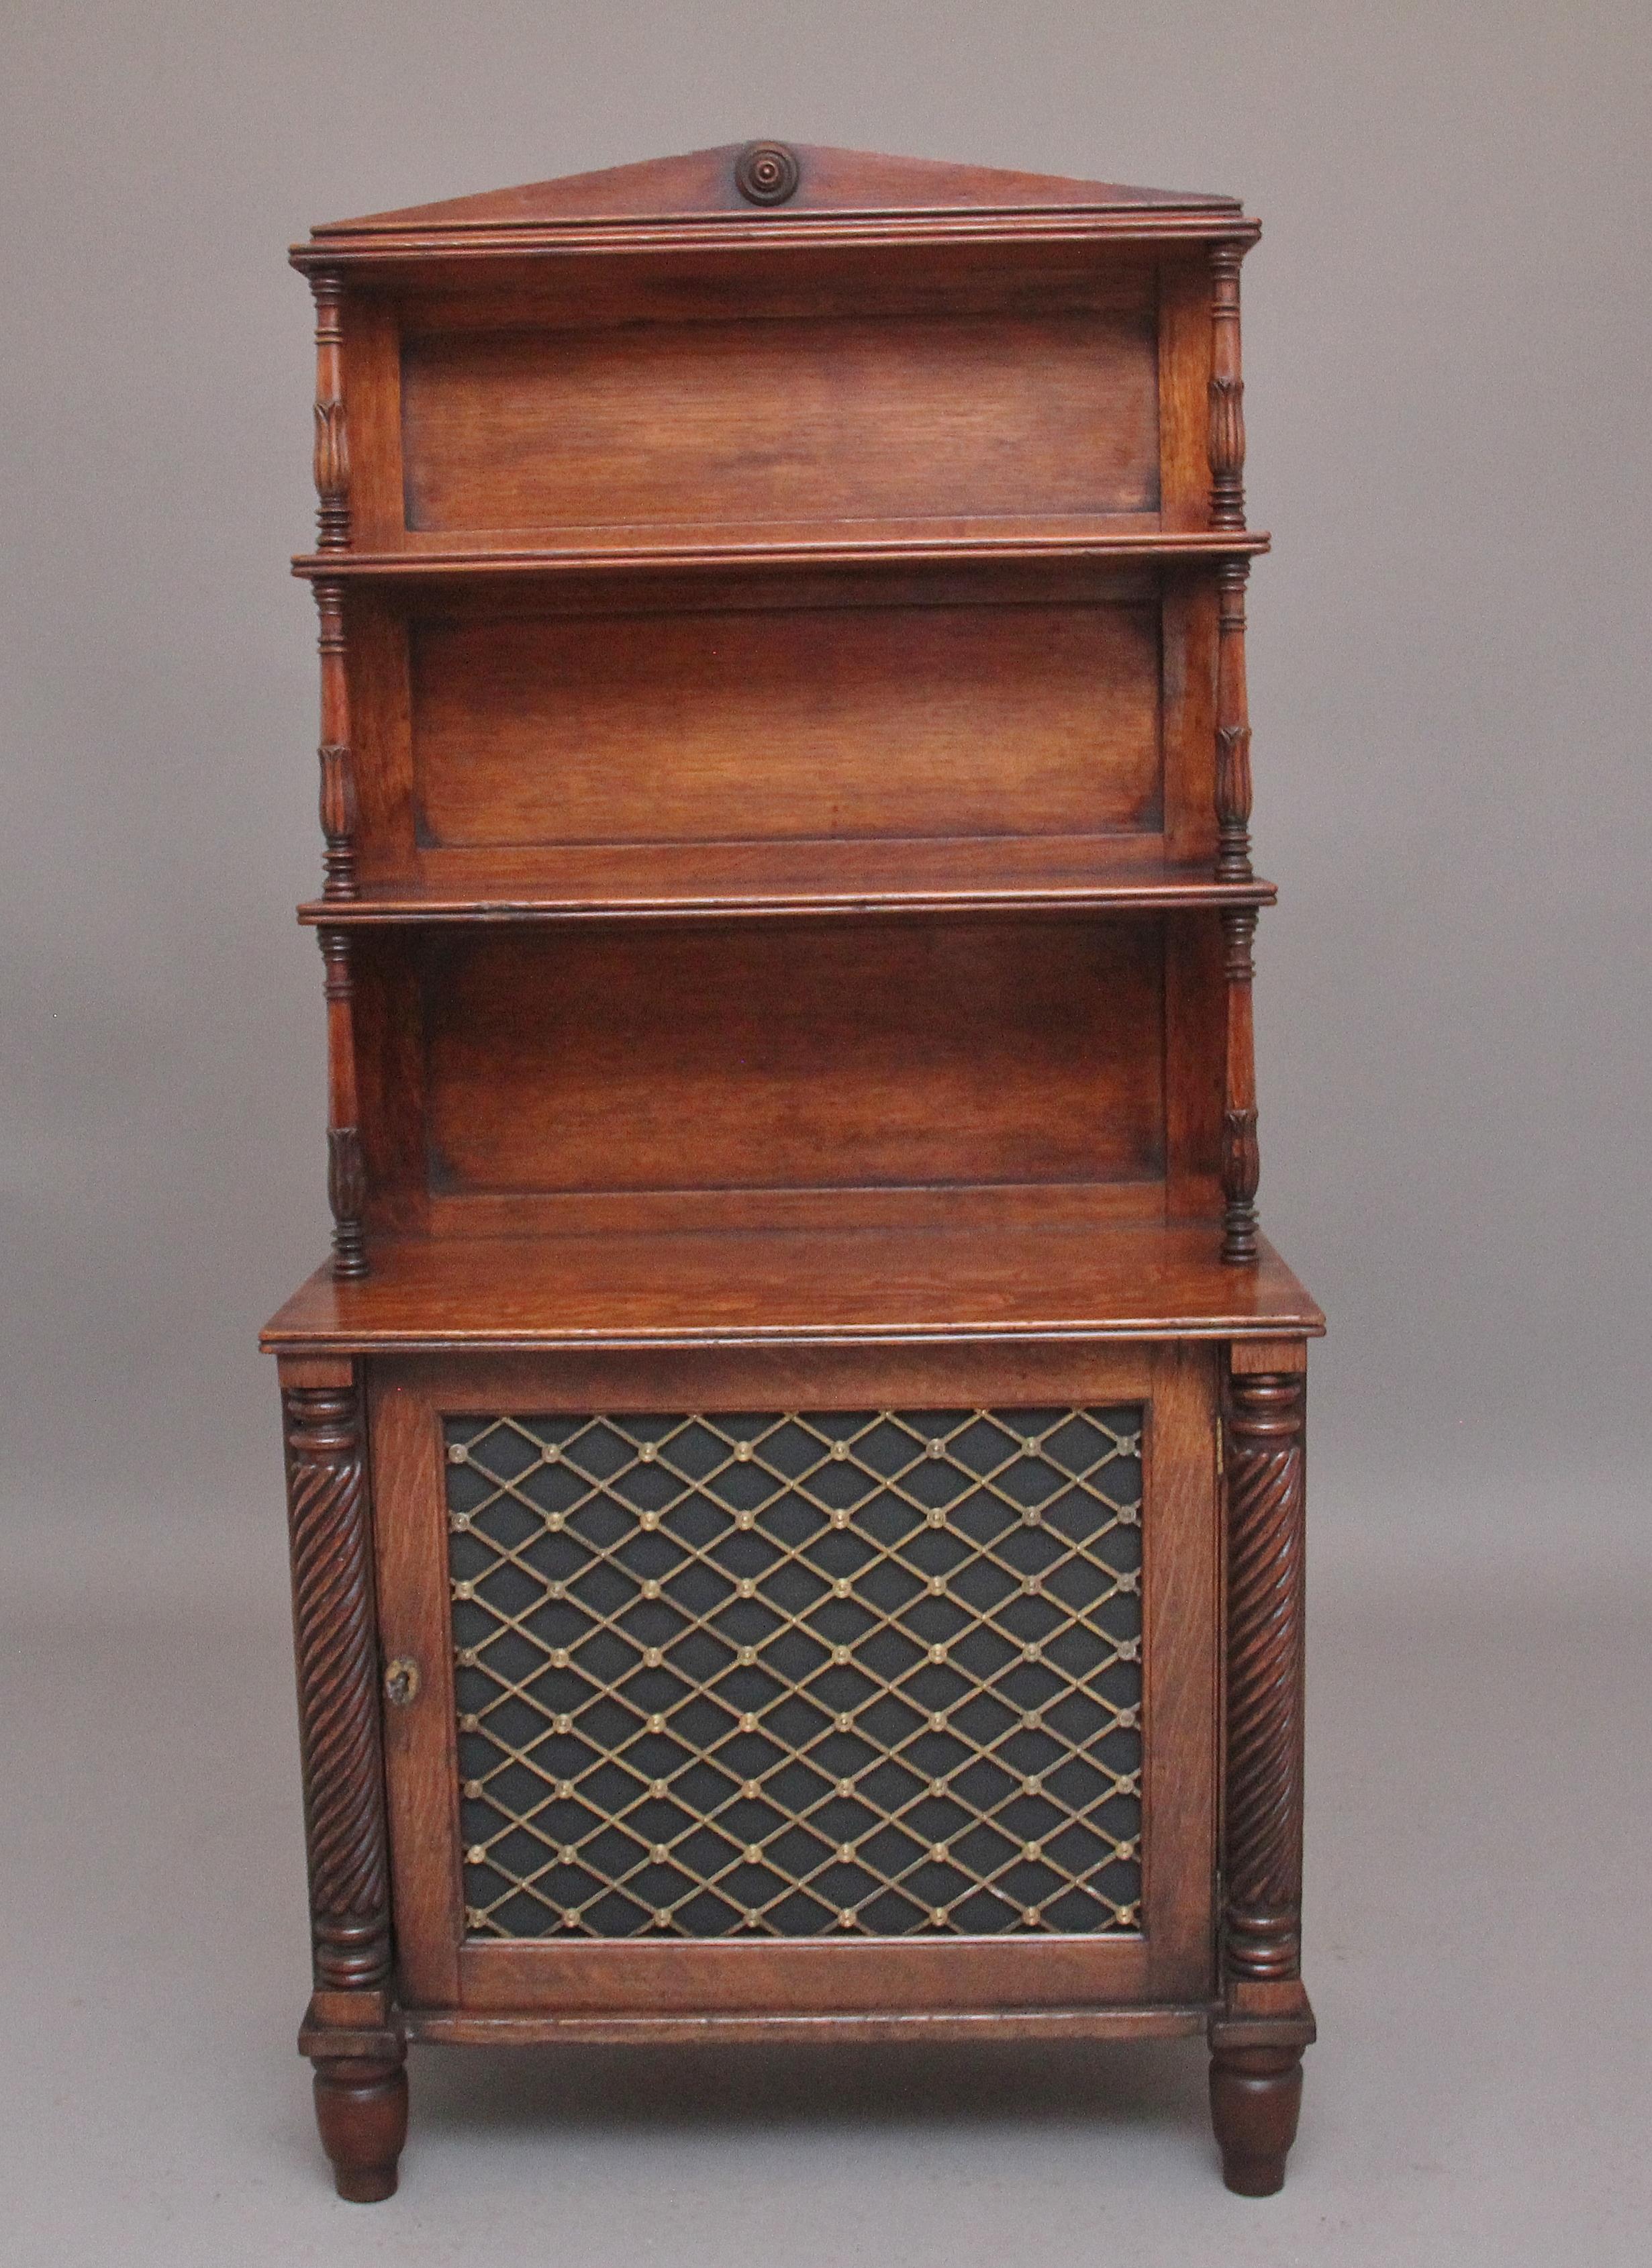 19th century oak bookcase cabinet of nice proportions, the arched cornice above three shelves with reeded edges supported by finely turned and carved columns, with a panelled back, the bottom section having a hinged cupboard door with decorative